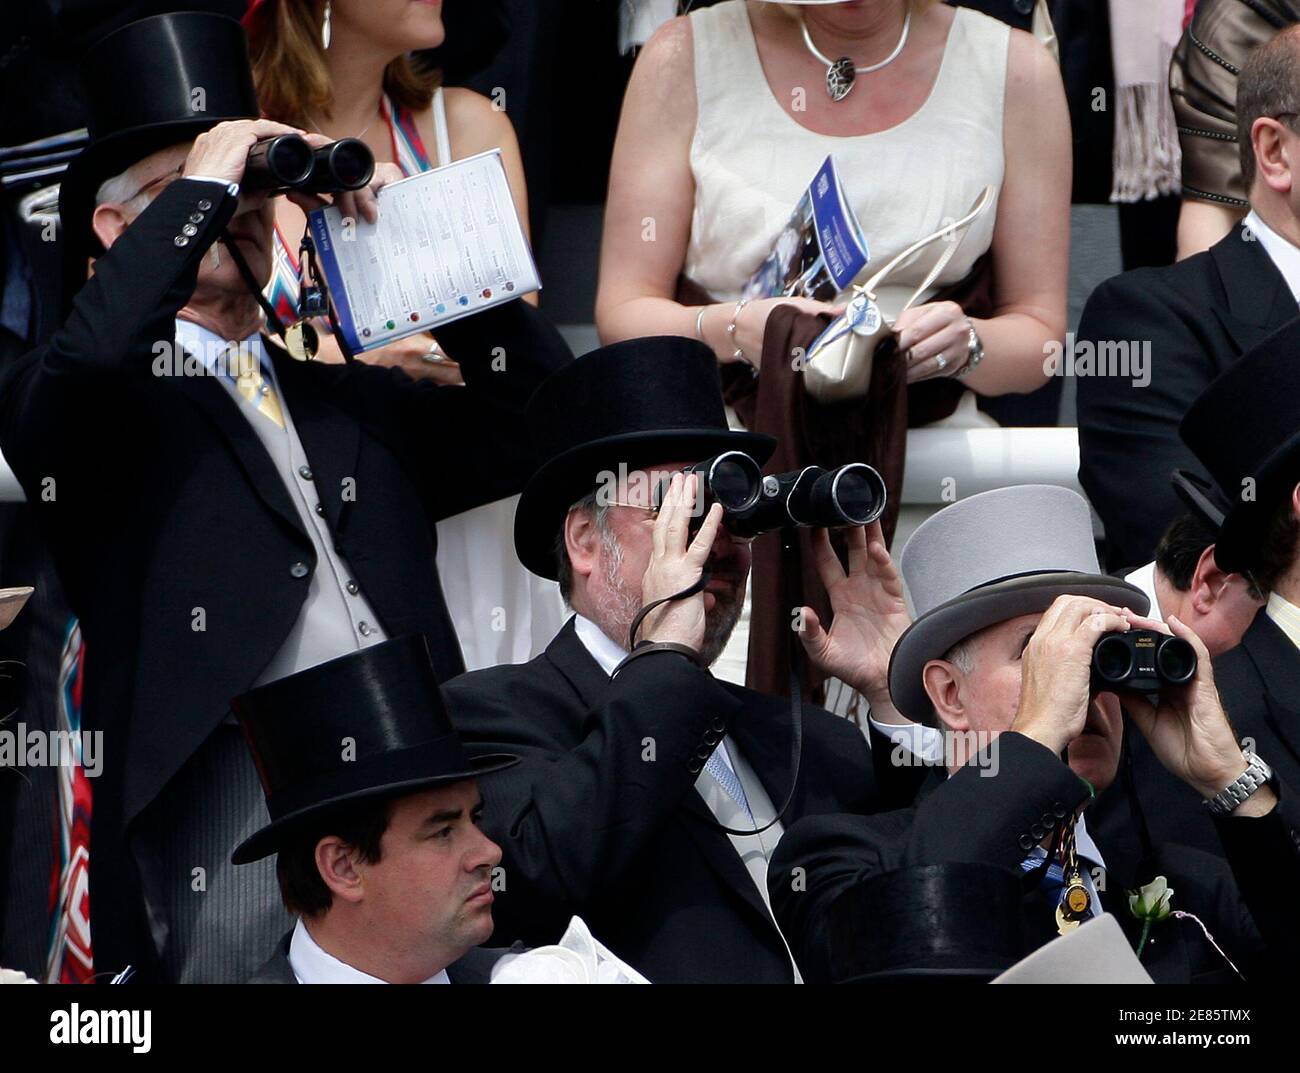 People watch the first race during the Epsom Derby Festival at Epsom Downs in Surrey, southern England, June 7, 2008.    REUTERS/Darren Staples   (BRITAIN) Stock Photo